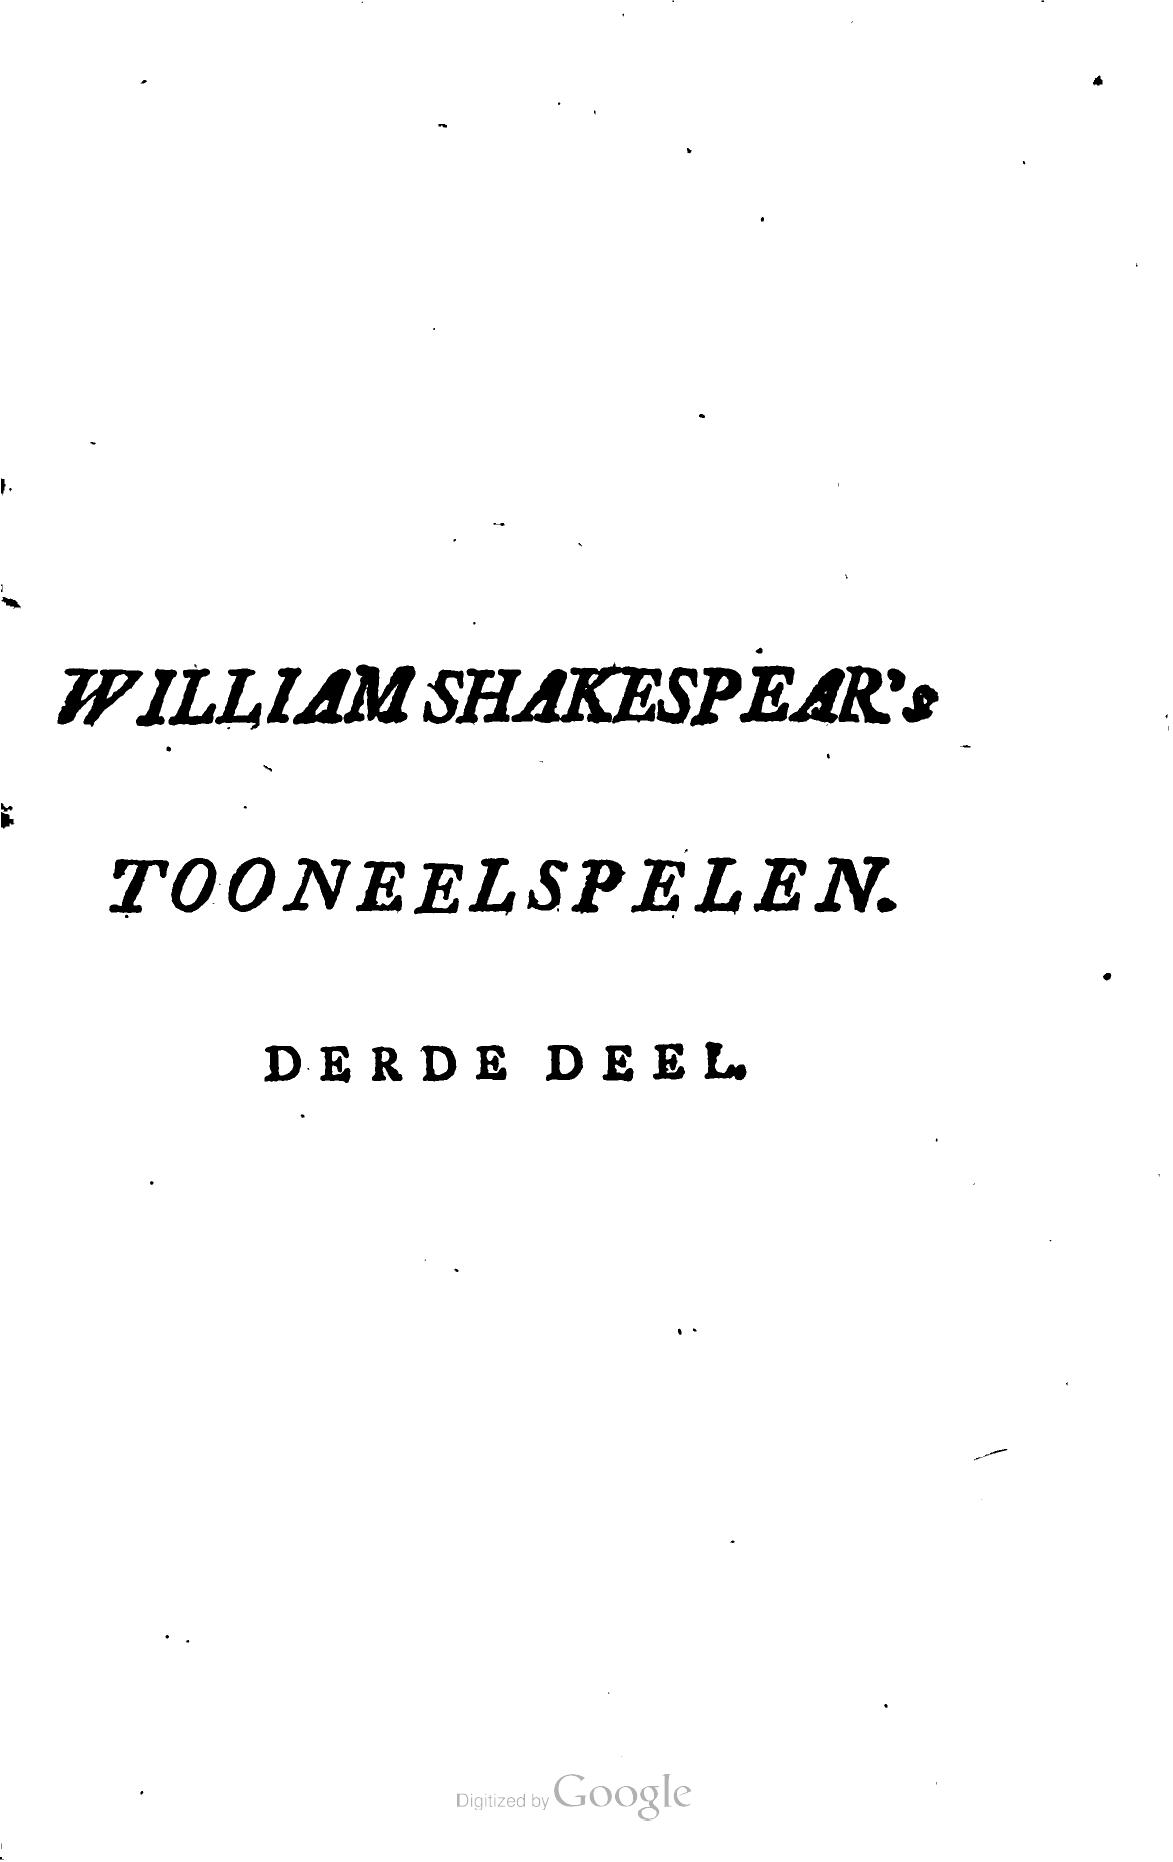 Shakespeare1781a01